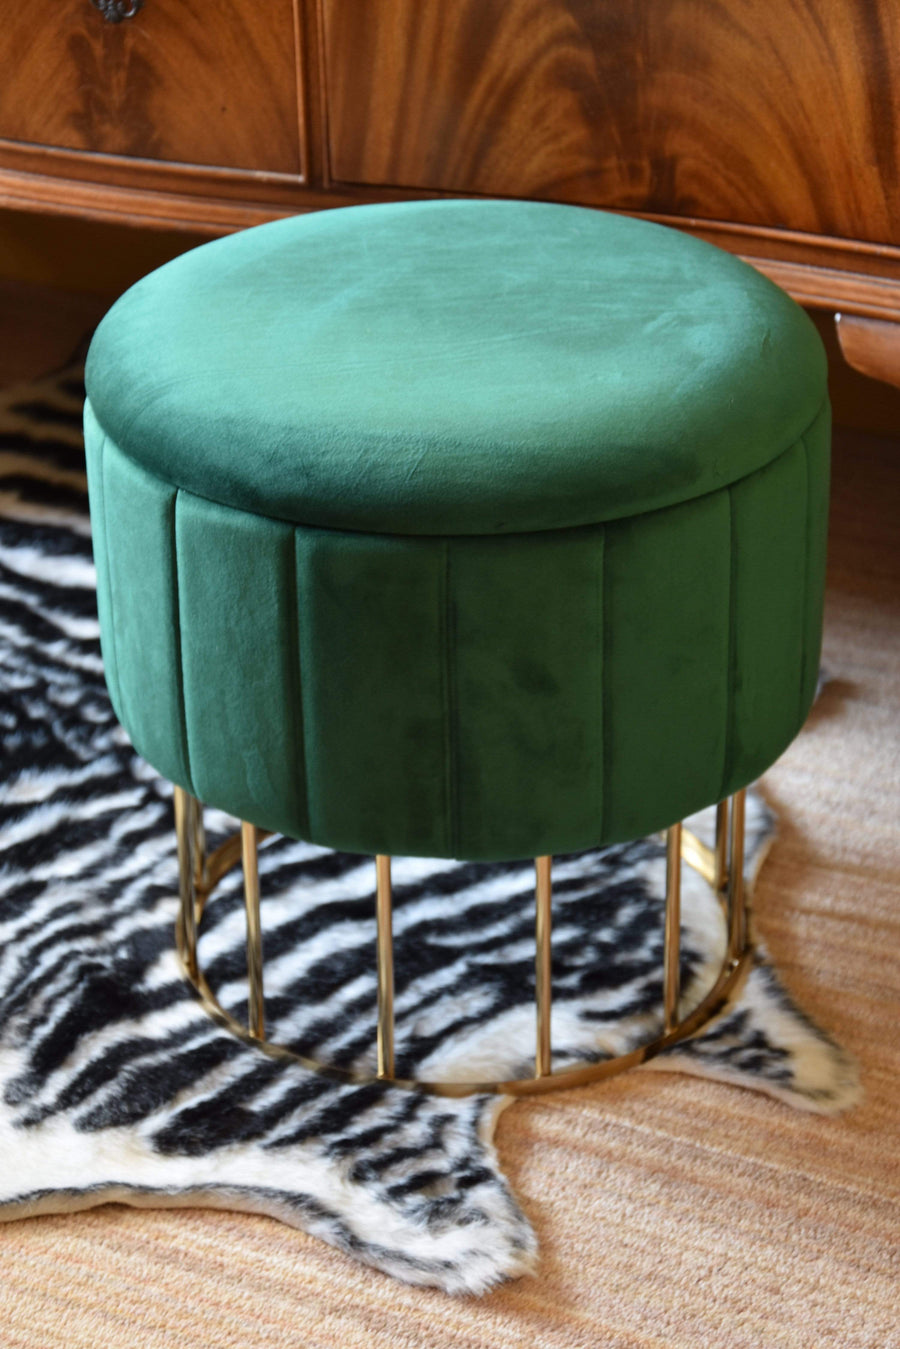 ESME Home ROUND METAL STORAGE OTTOMAN - EMERALD GREEN IN MAIL ORDER PACKAGING - KD